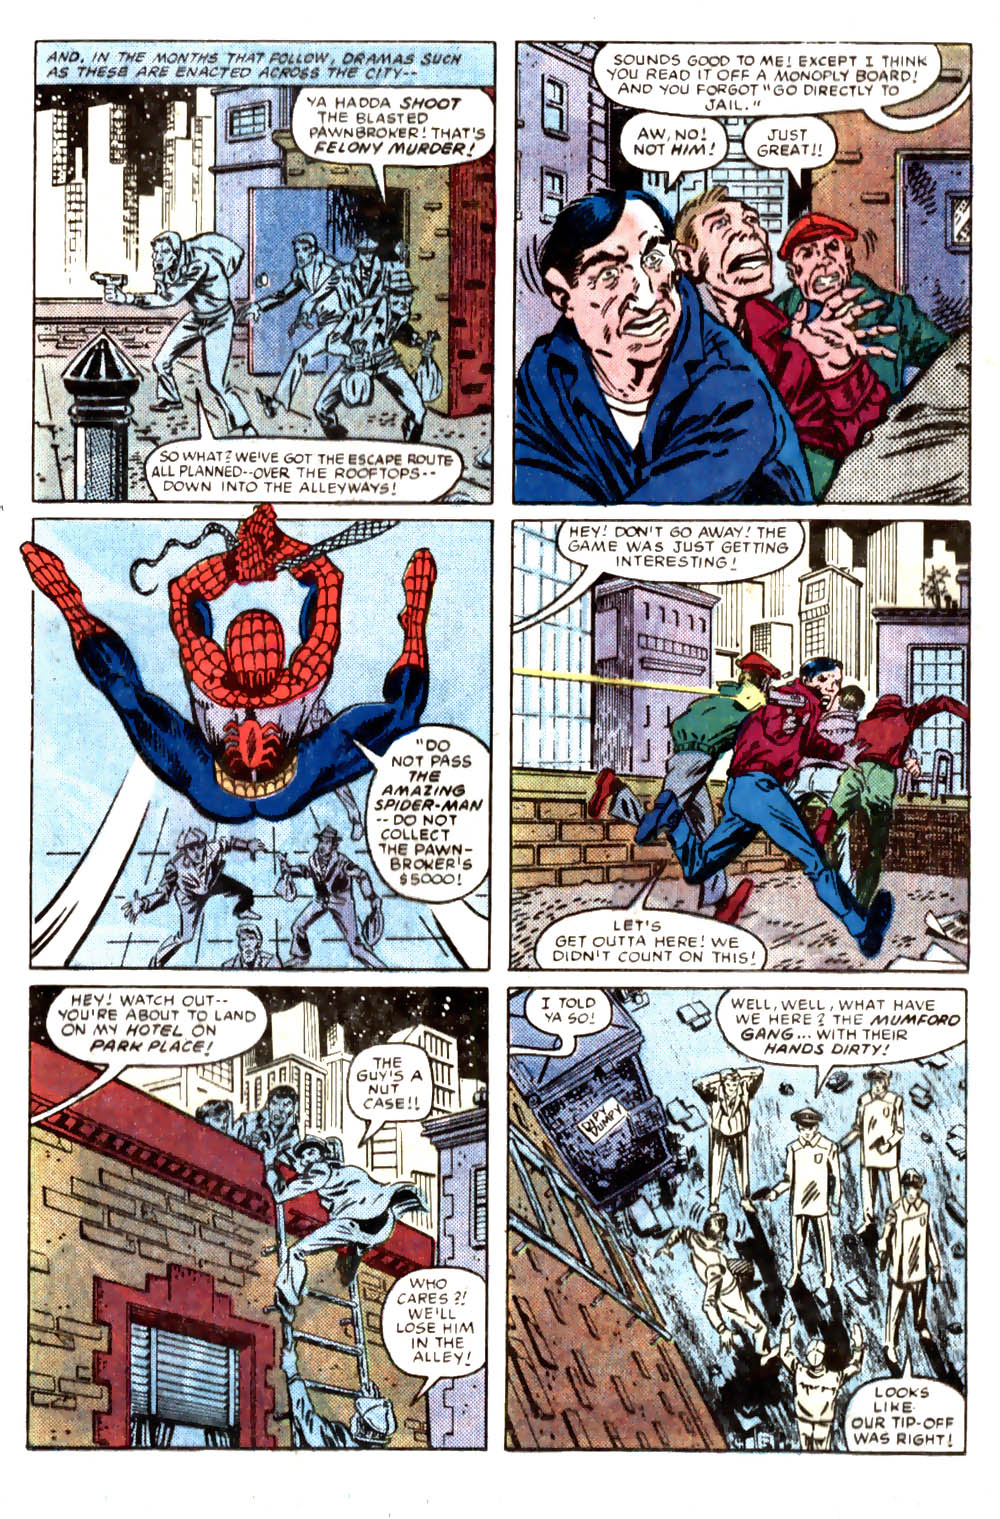 What If? (1977) issue 46 - Spiderman's uncle ben had lived - Page 20